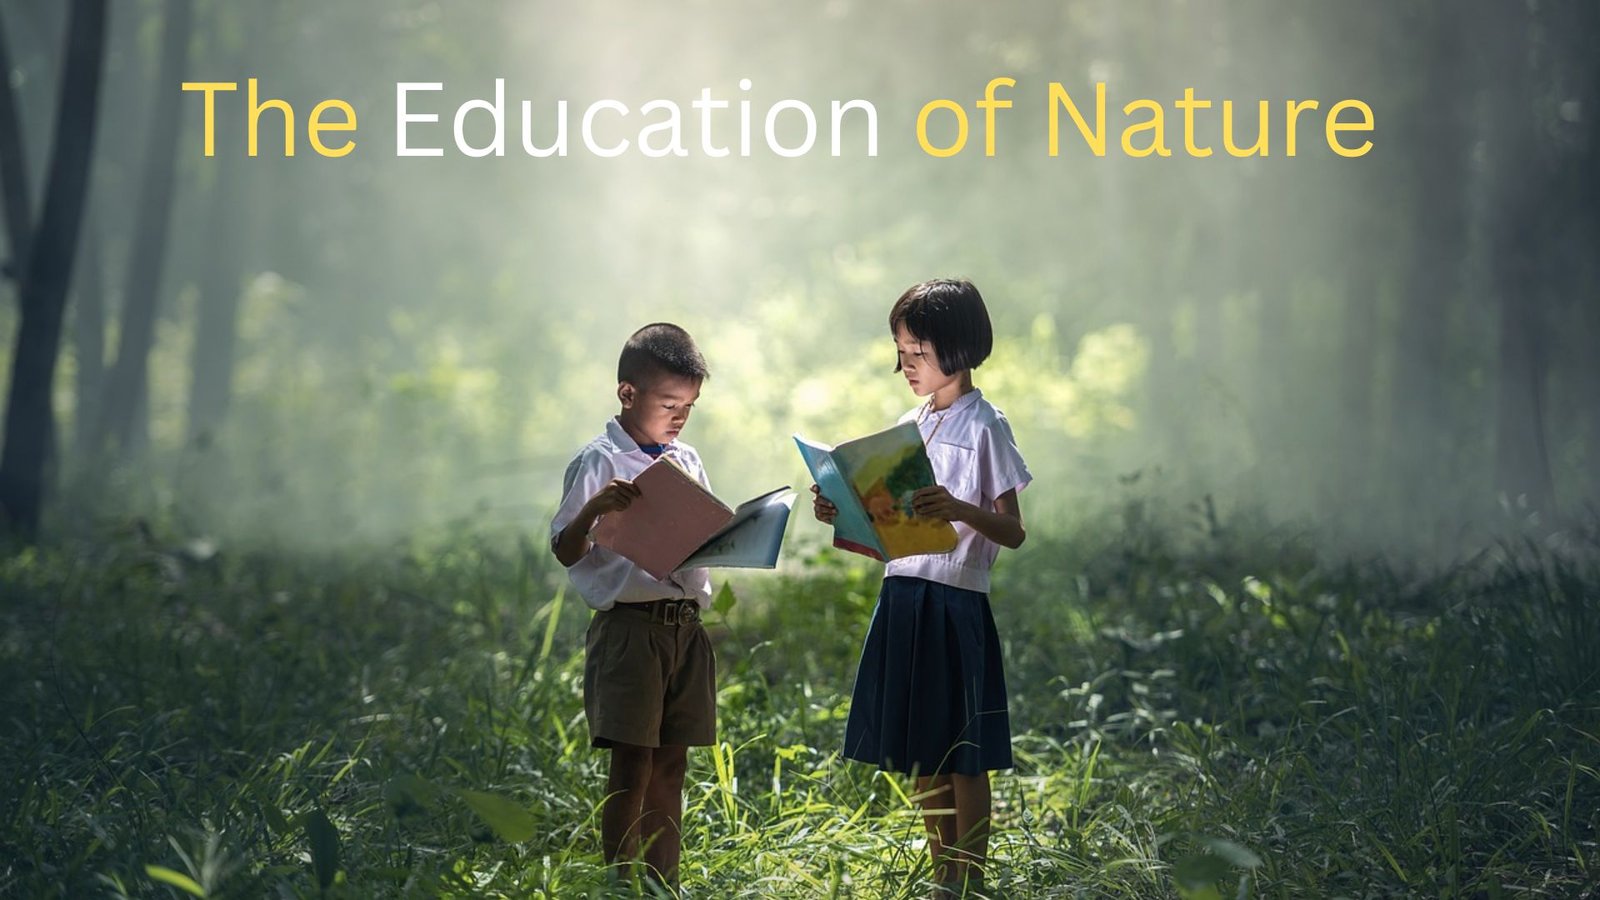 The Education of Nature